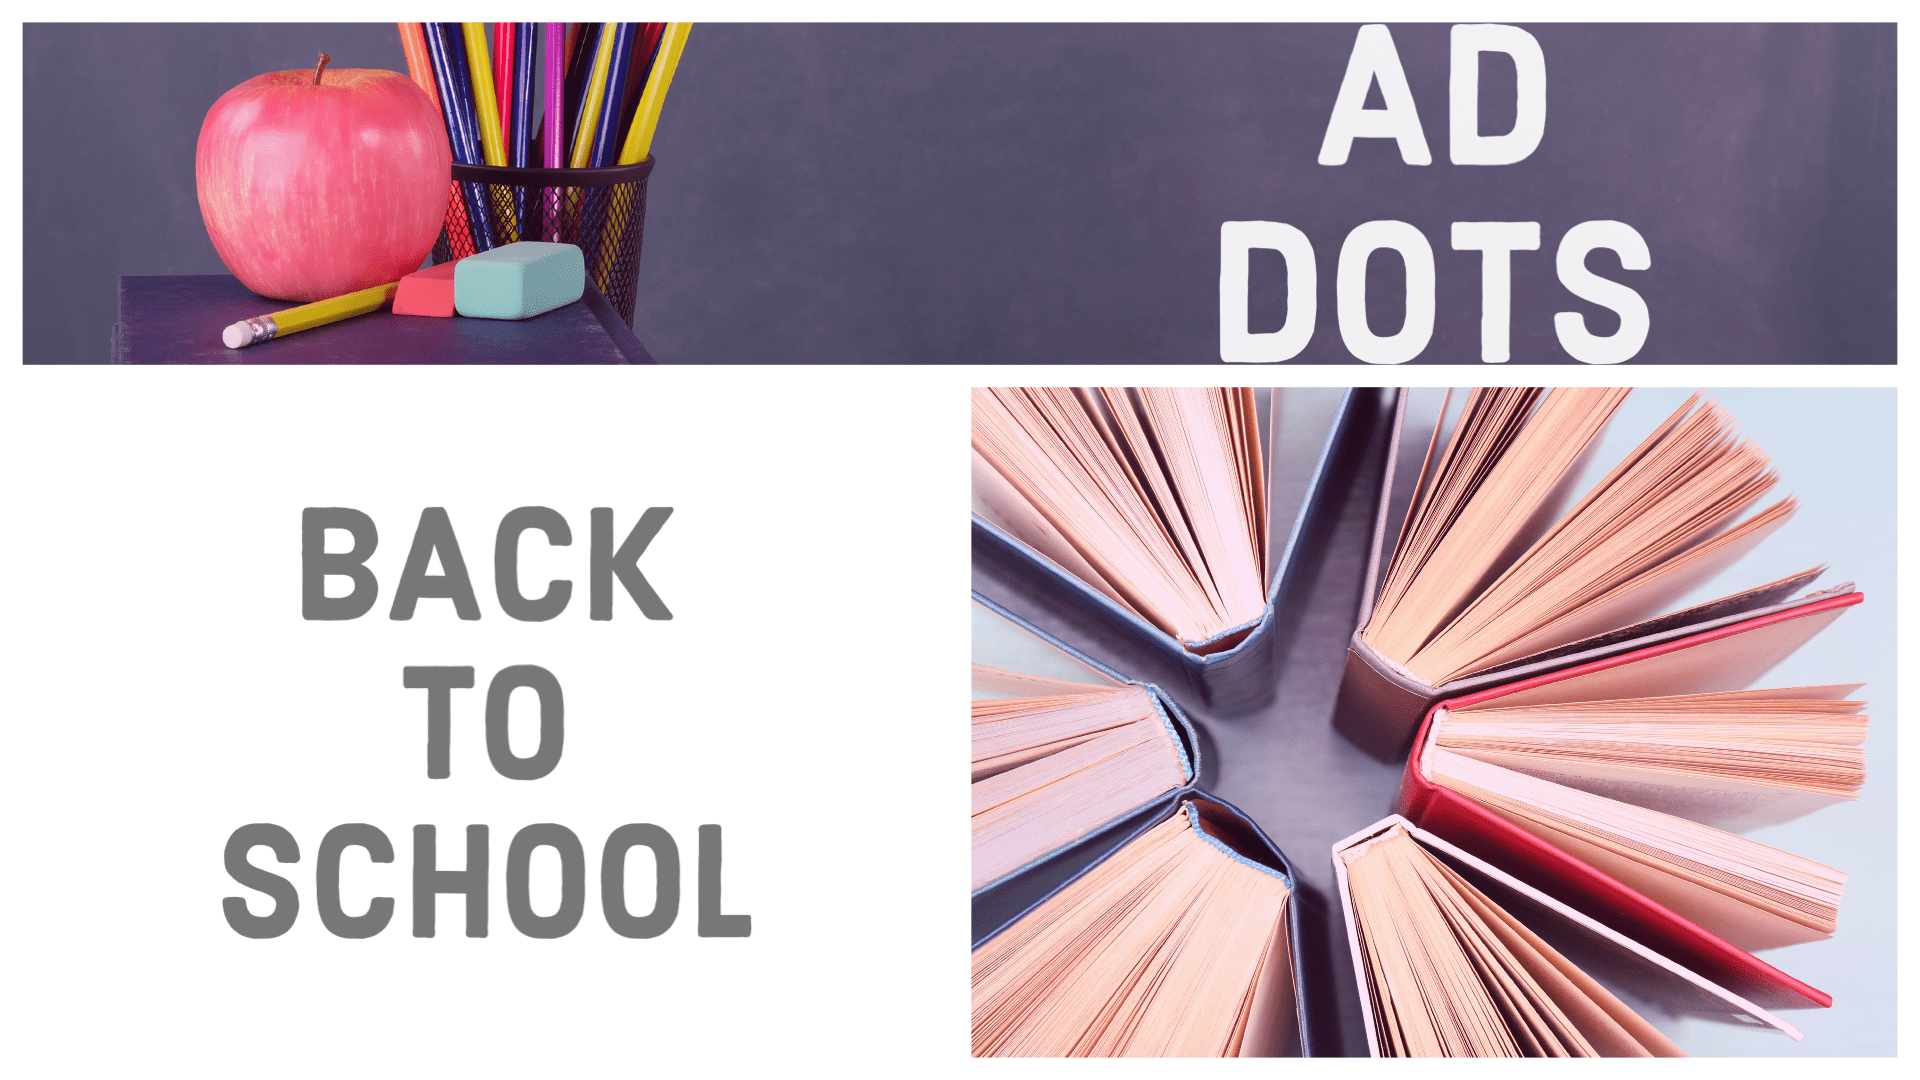 AD DOTS - back to school